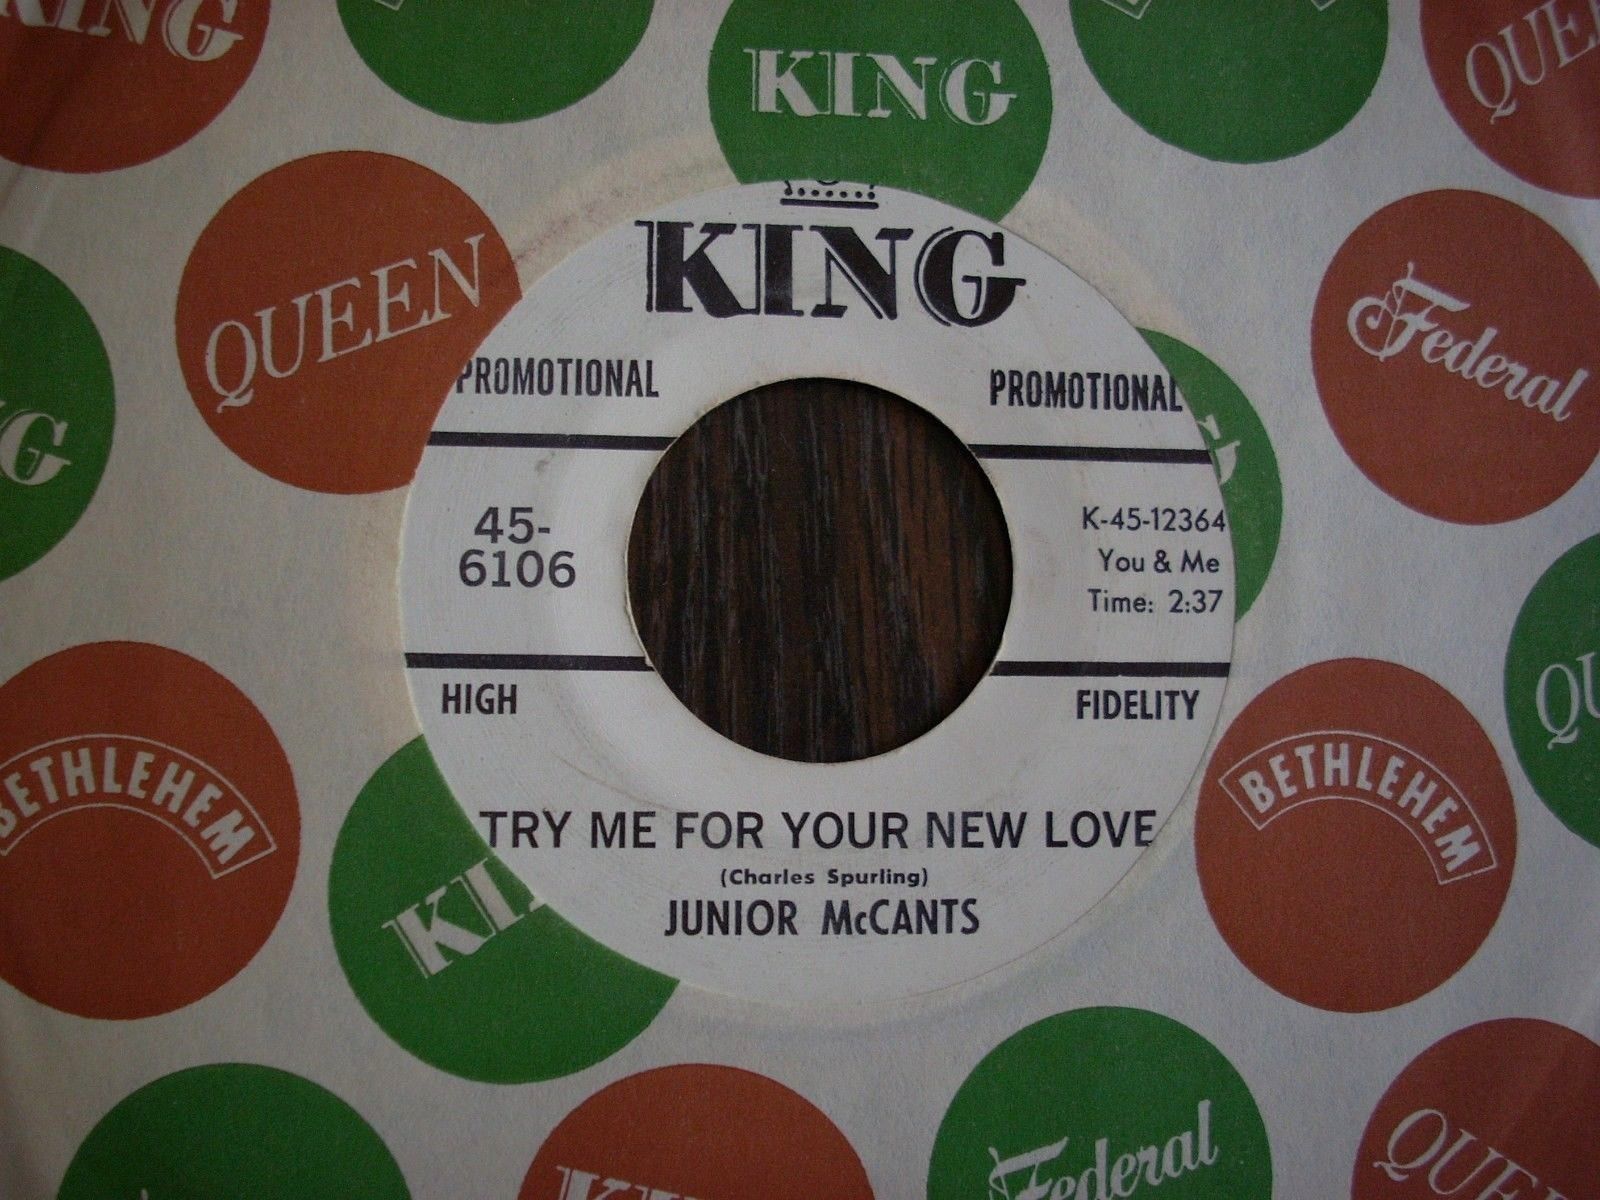 BEYOND RARE NORTHERN SOUL  JUNIOR  McCANTS  try me for your new love KING PROMO